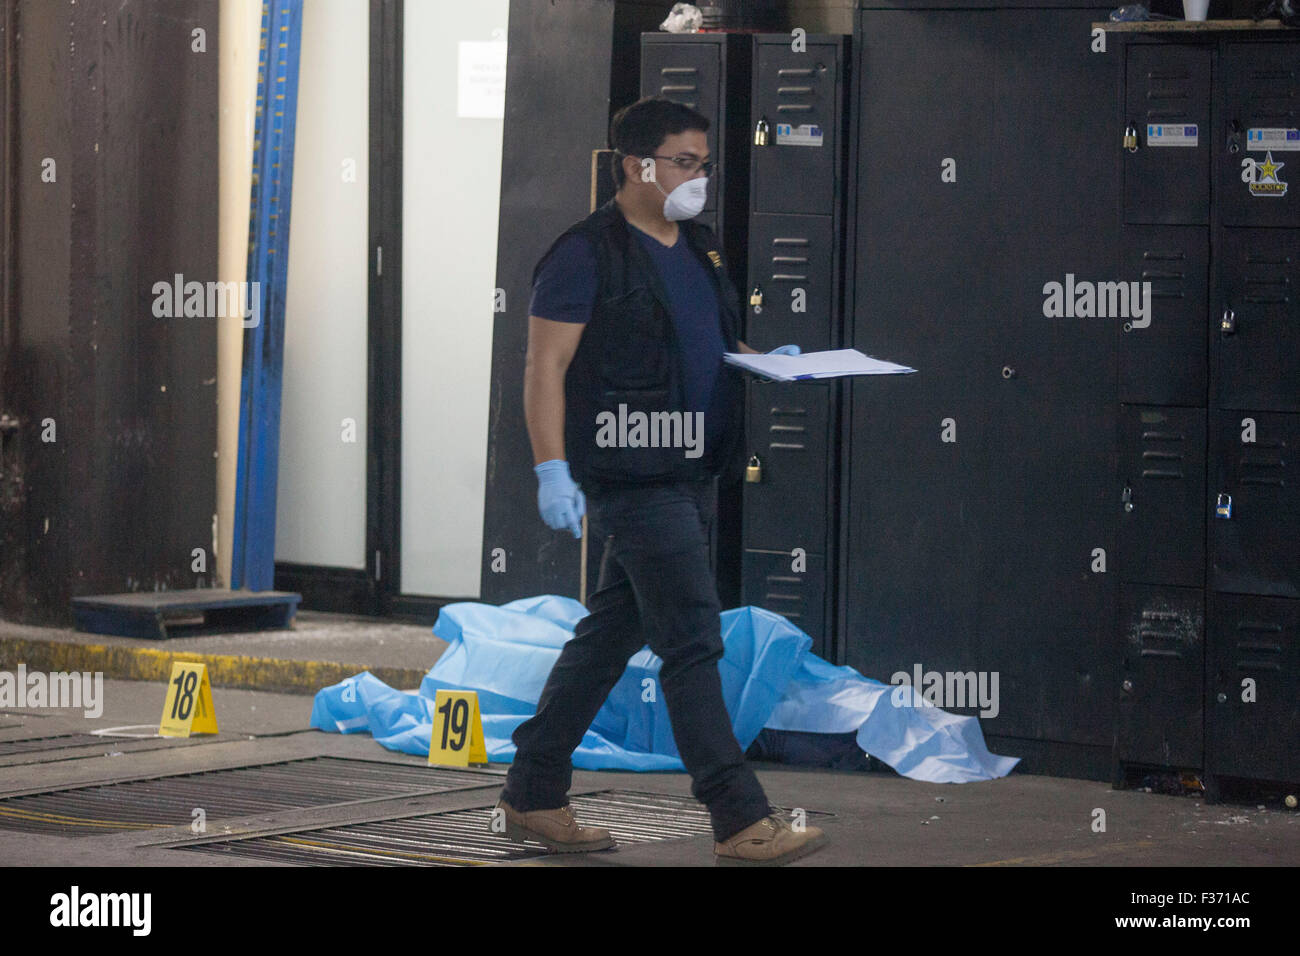 Guatemala City, Guatemala. 30th Sep, 2015. A prosecutor from Public Prosecutor's Office investigates in the Tower of Courts, in Guatemala City, capital of Guatemala, Sept. 30, 2015. A gang member was killed and two others wounded by rival gangsters of Barrio 18 and Mara Salvatrucha while they were held under custody in the Tower of Courts basement, located in the Civic Center of the Guatemalan capital, according to local press information. Credit:  Luis Echeverria/Xinhua/Alamy Live News Stock Photo